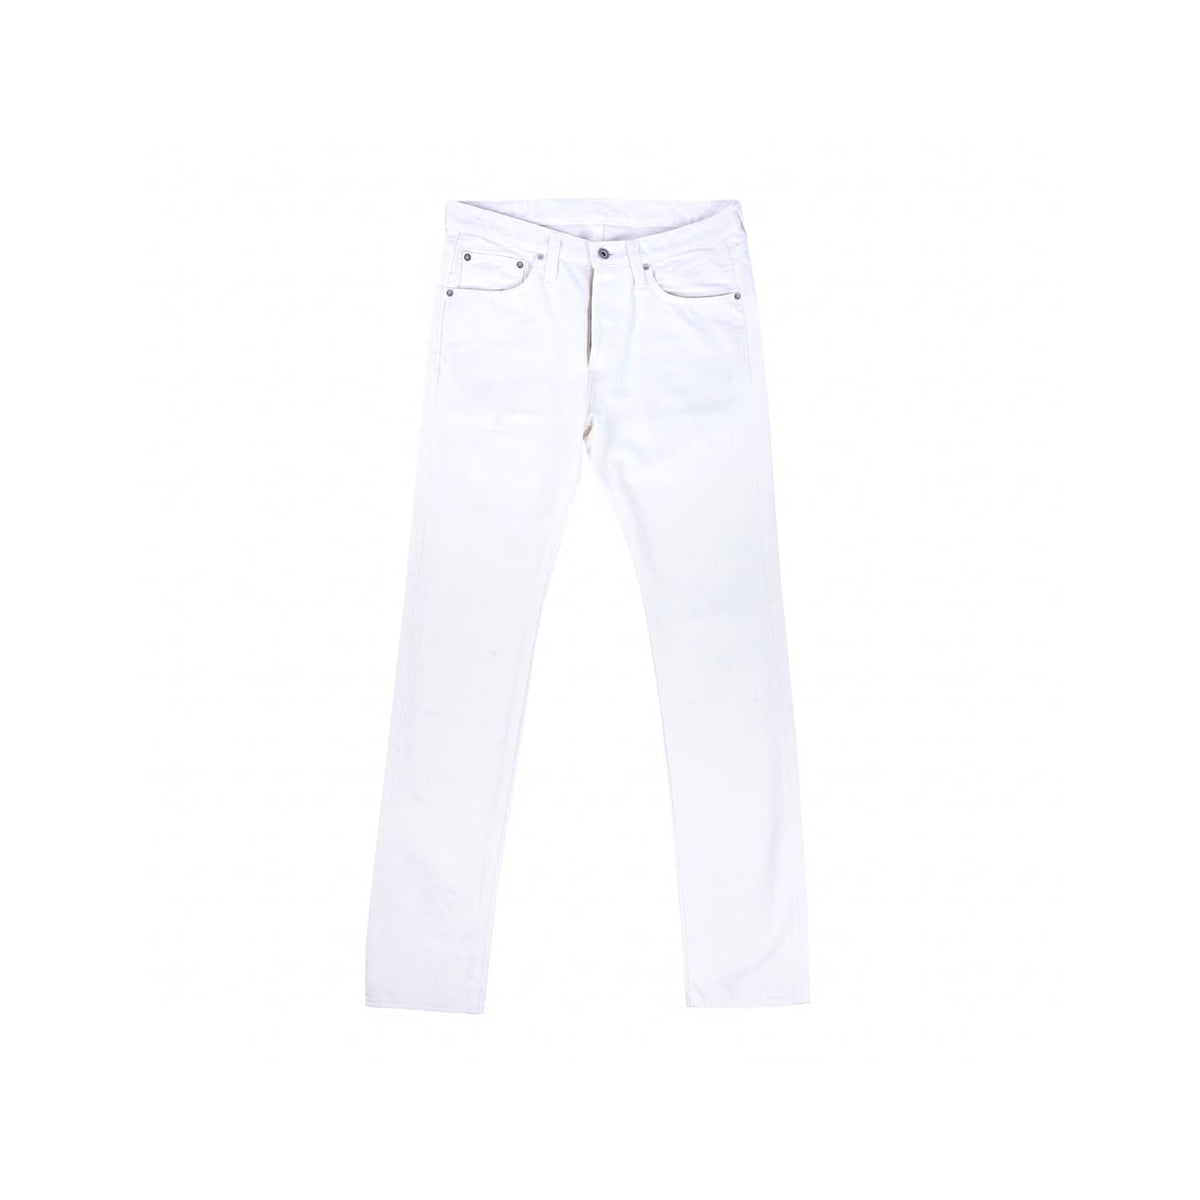 Iron Heart IH-777-WT 13.5oz Cotton Twill Slim Tapered Cut Trousers White